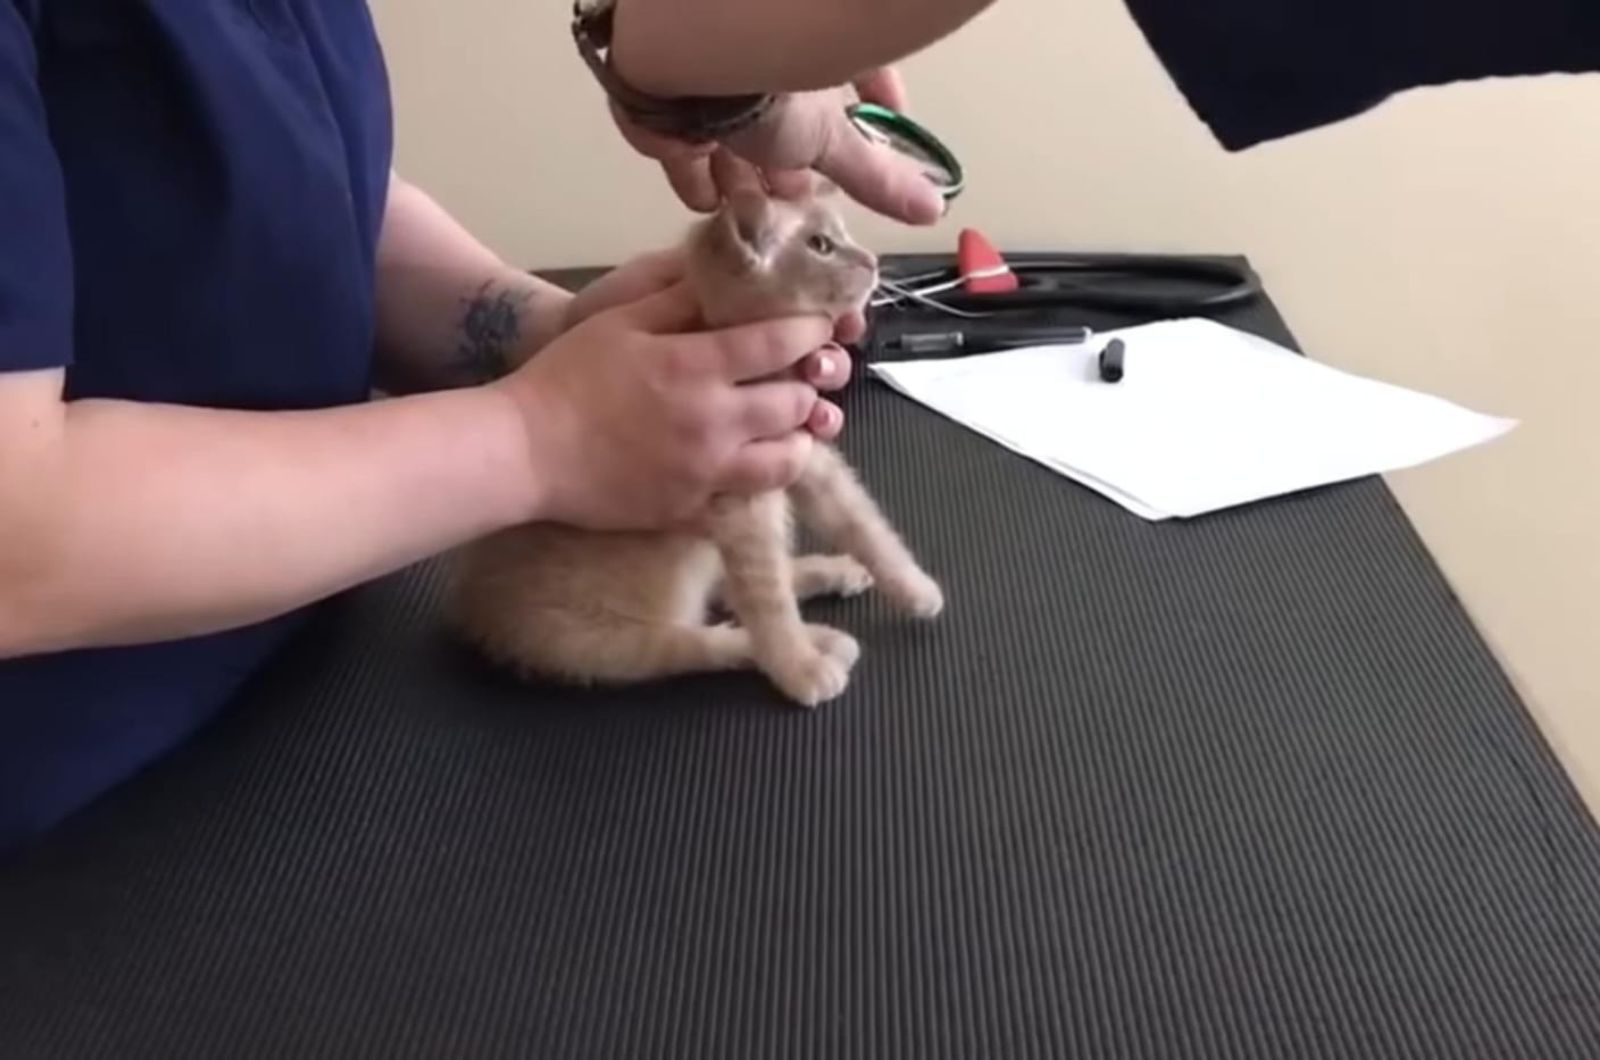 cat getting examined